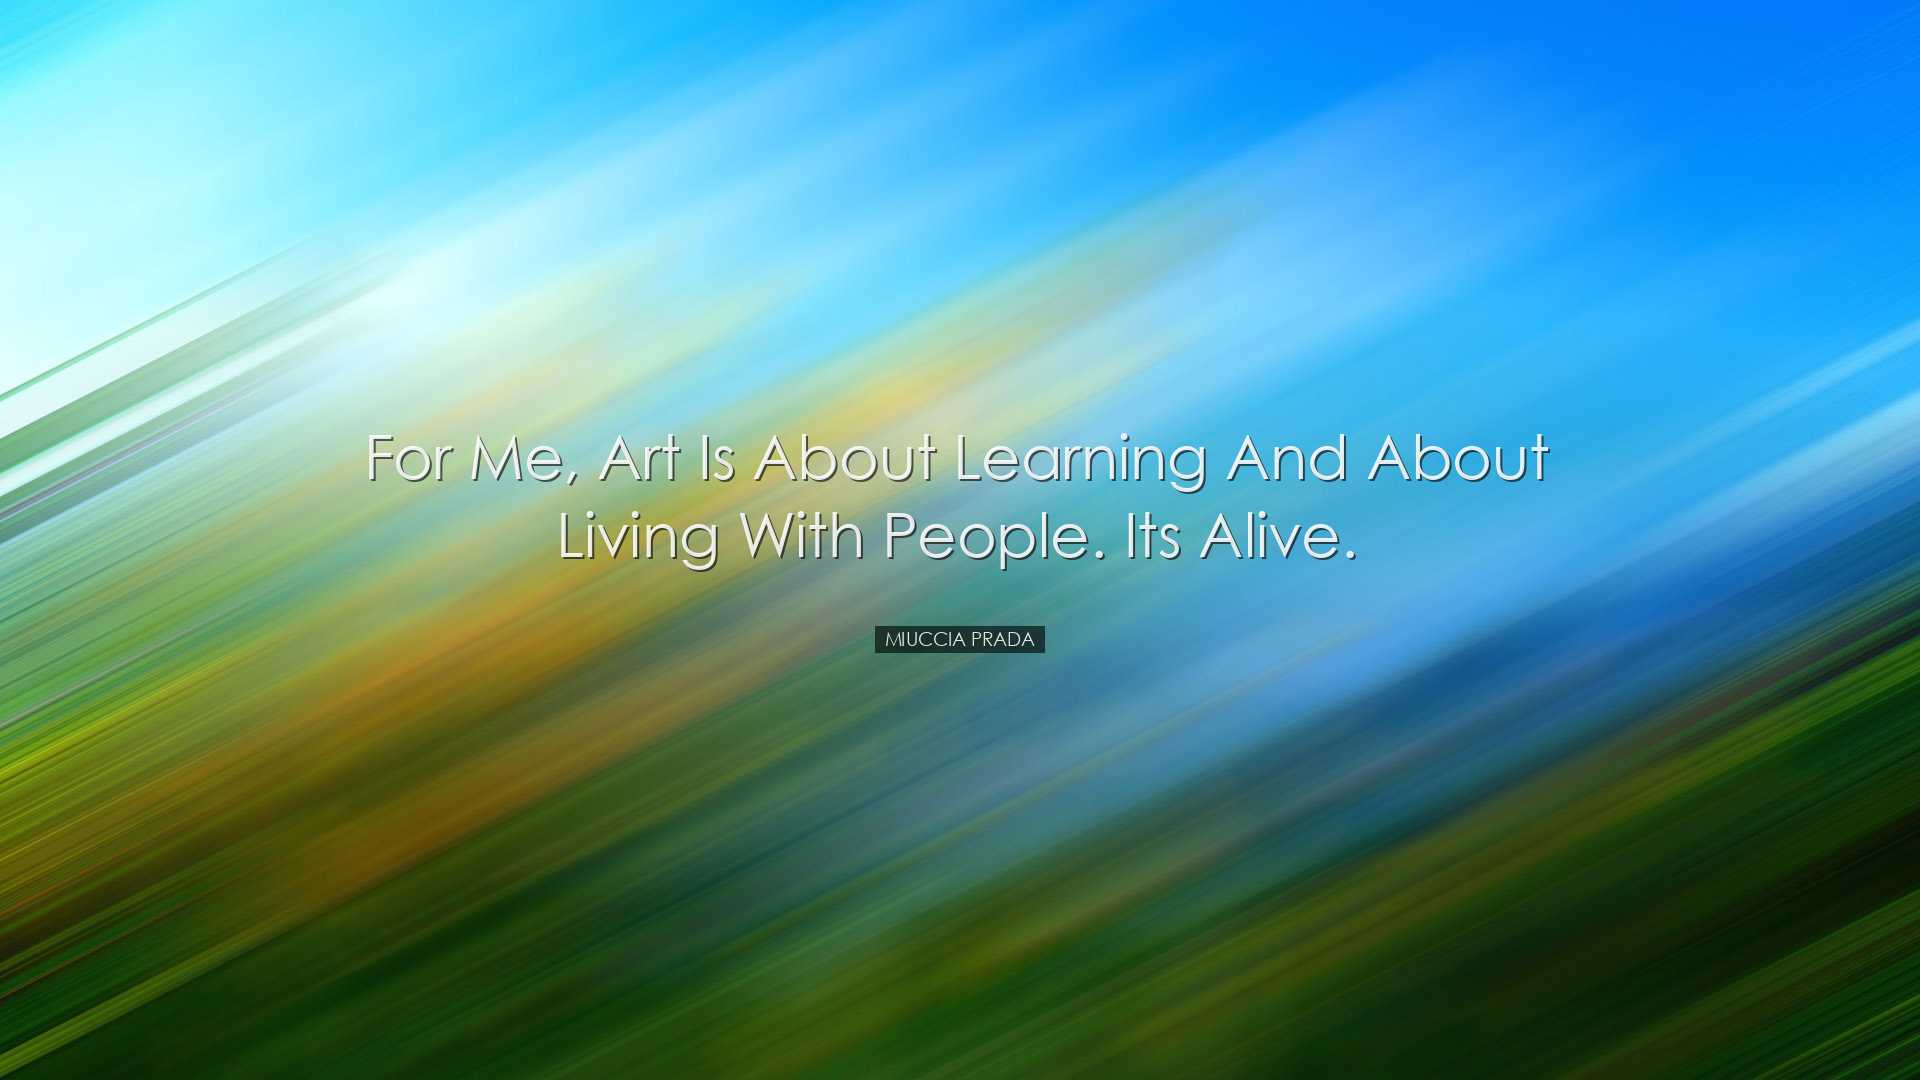 For me, art is about learning and about living with people. Its al